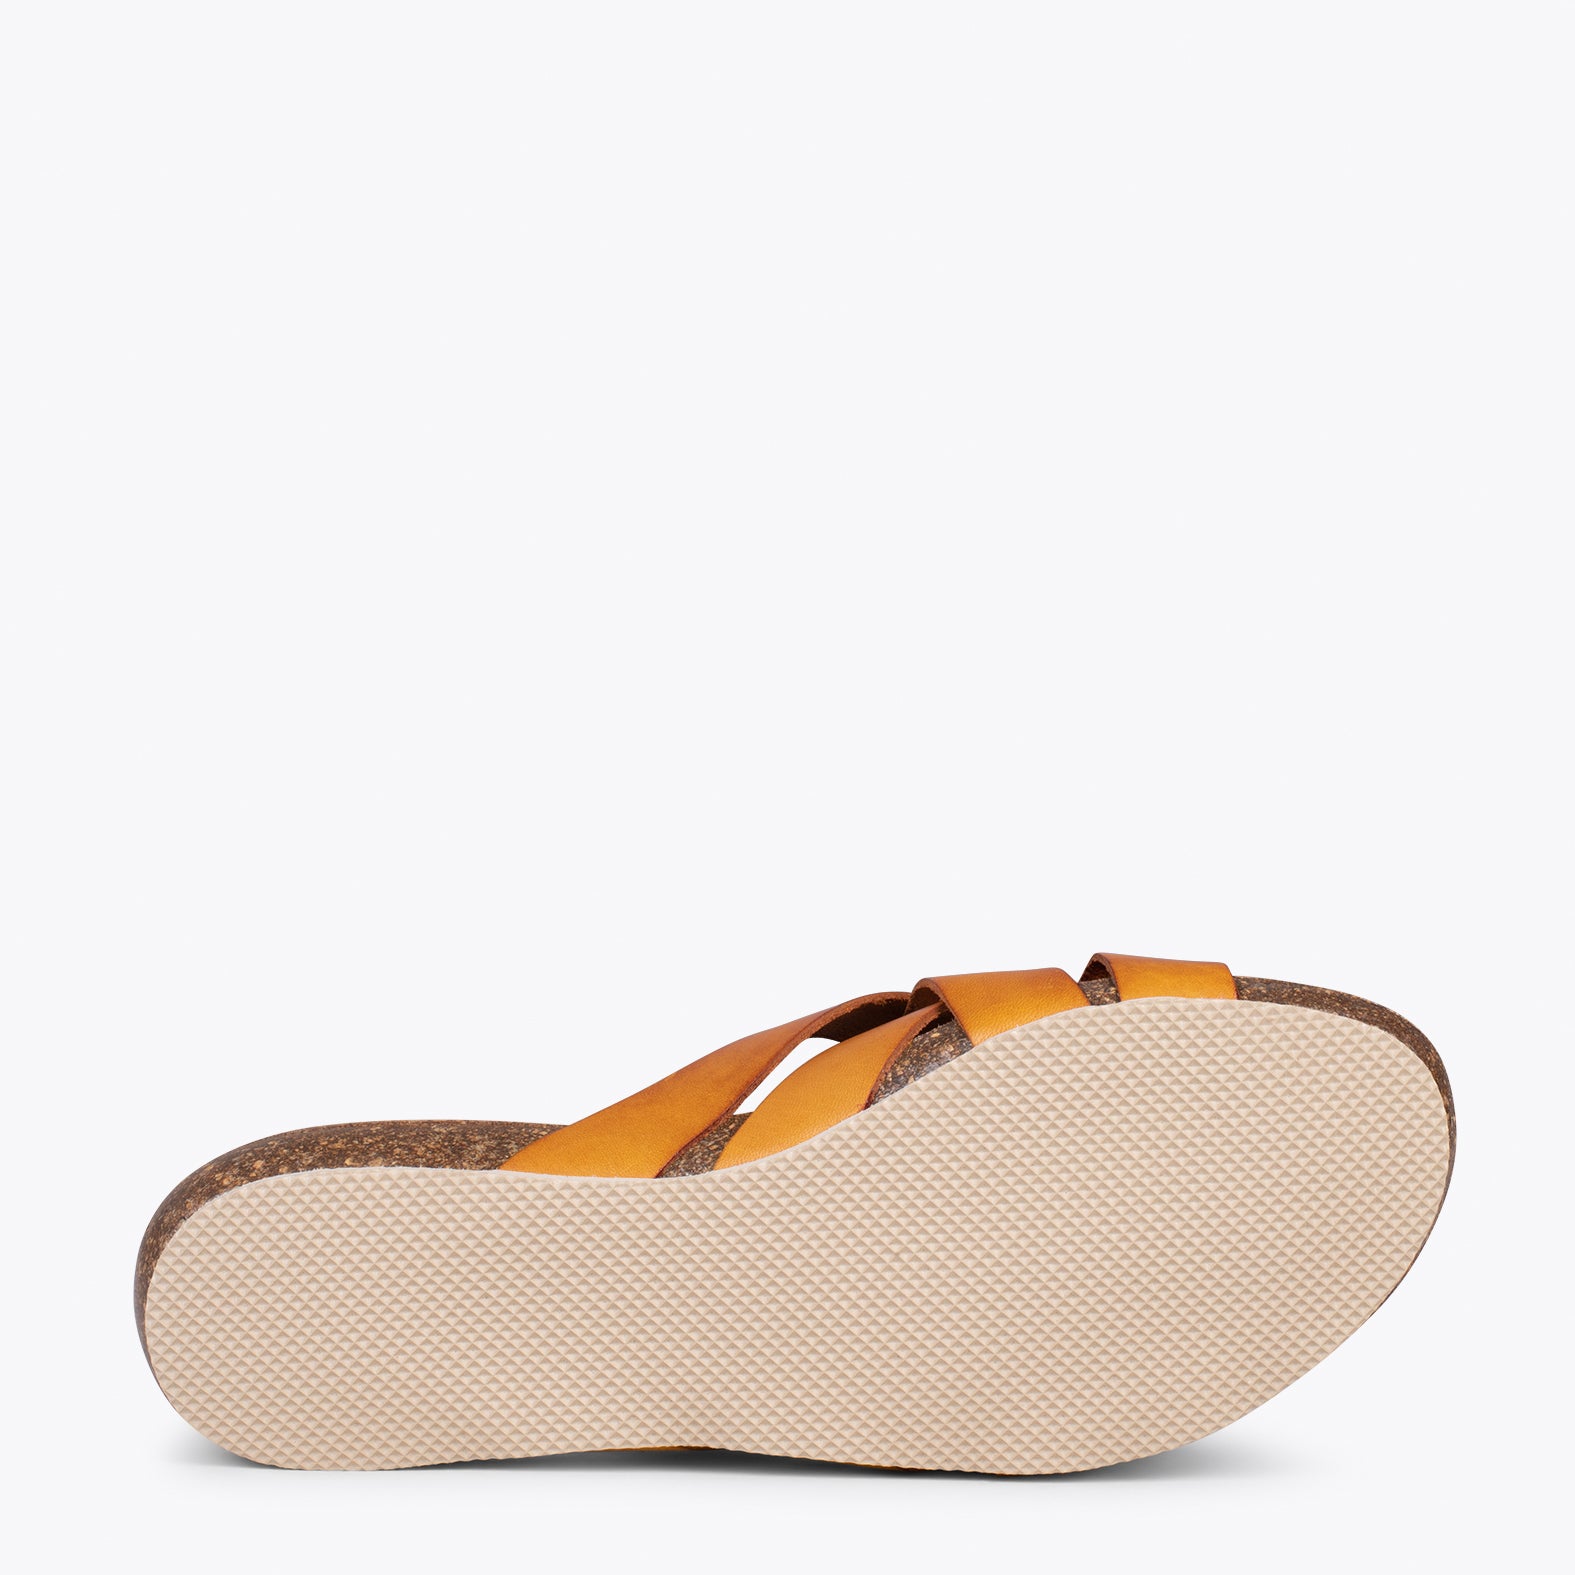 DHALIA – YELLOW slides with braided upper